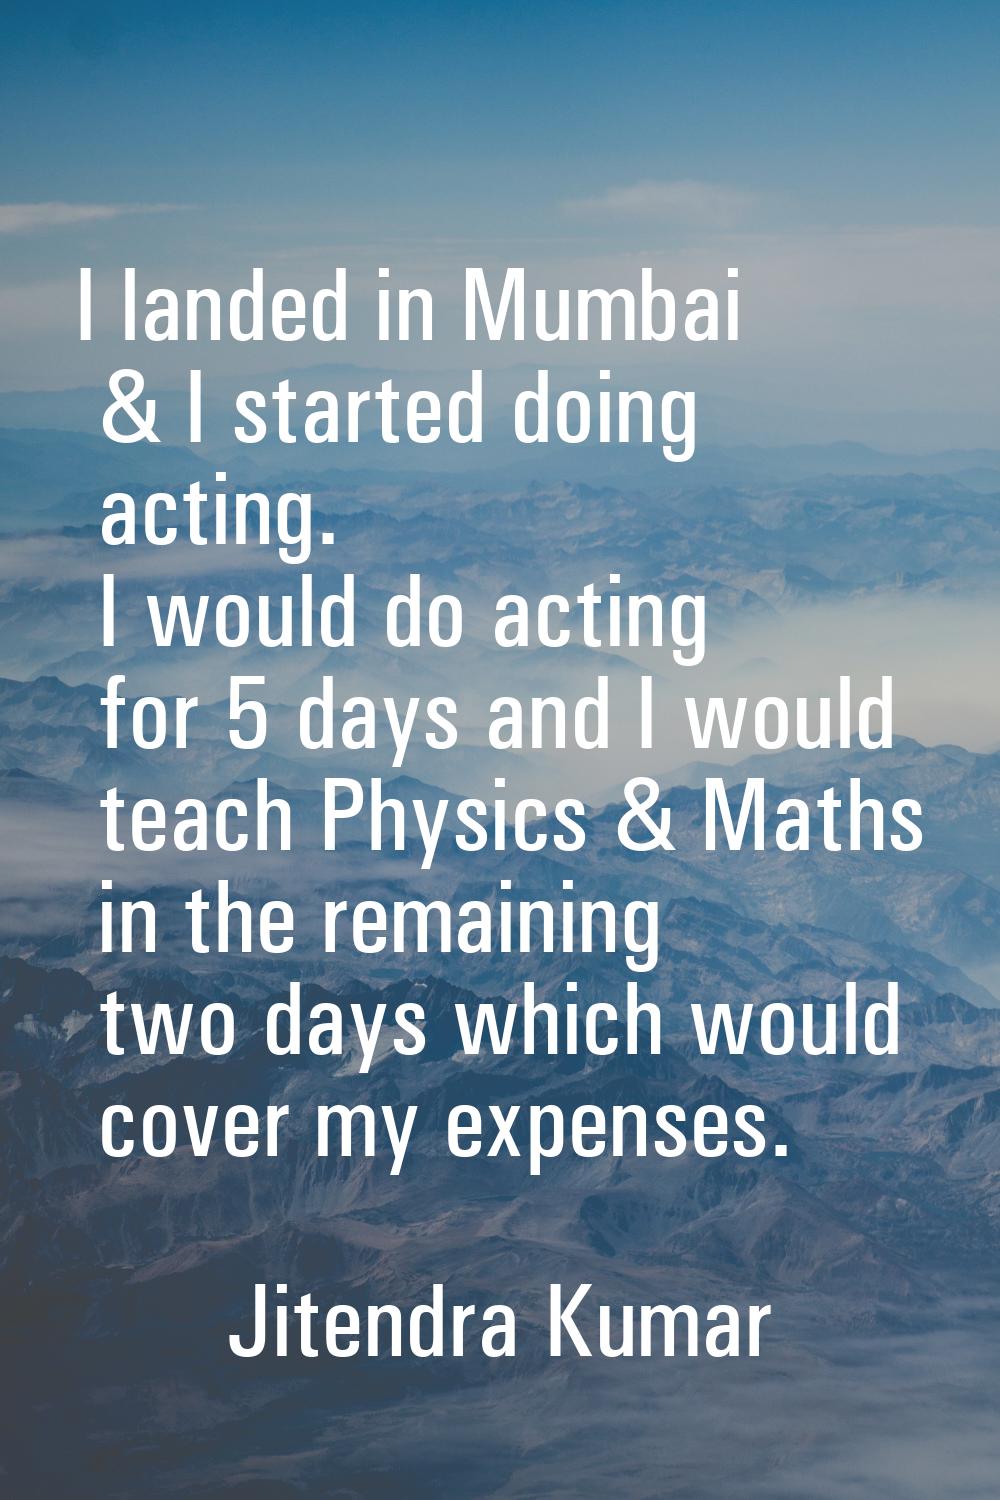 I landed in Mumbai & I started doing acting. I would do acting for 5 days and I would teach Physics